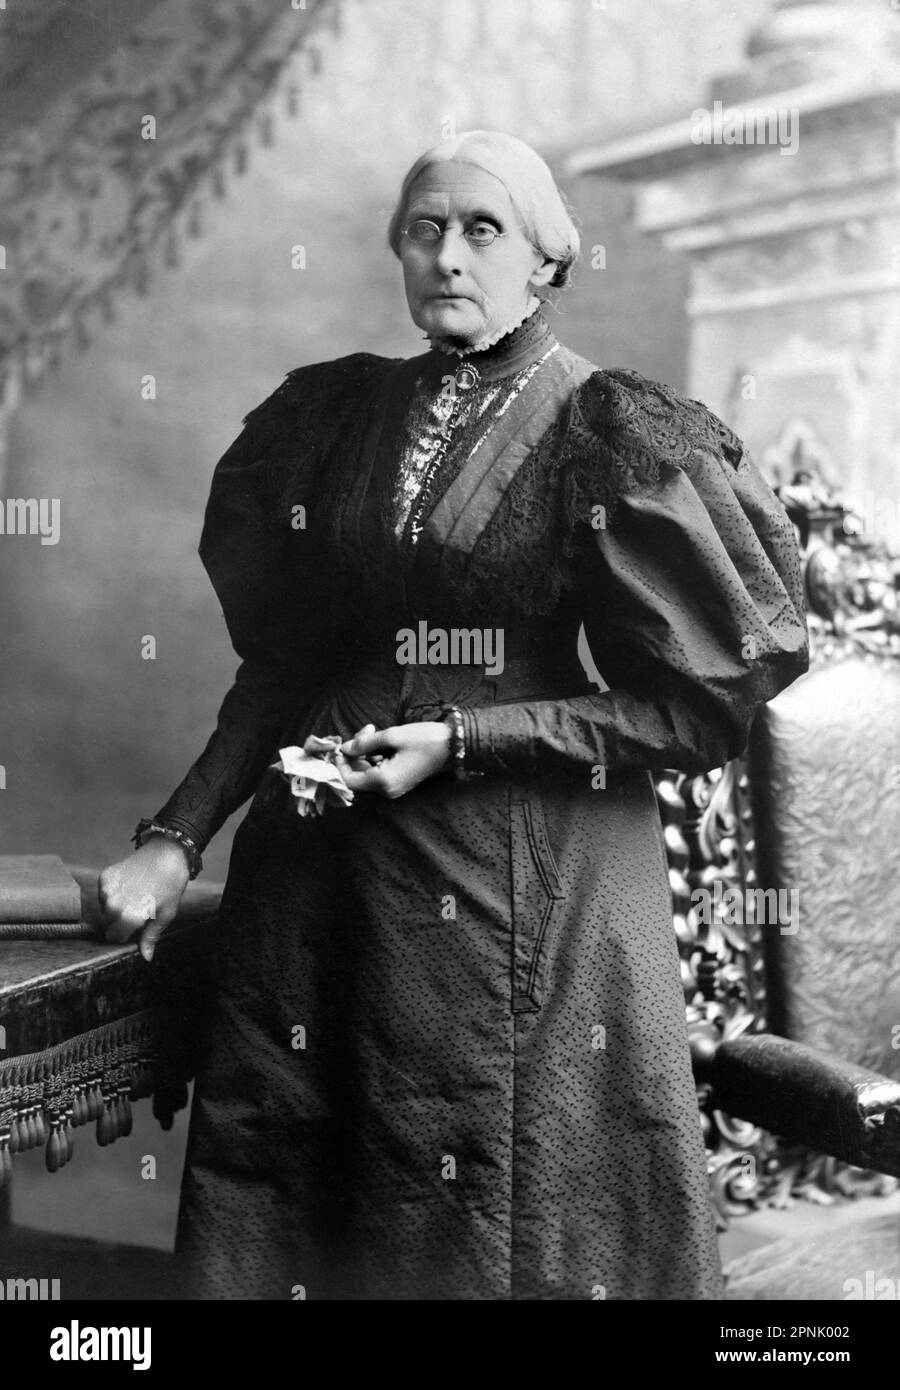 Susan B Anthony. Portrait of Susan Brownell Anthony (1820-1906), American suffragists and social reformer, by Theodore C. Marceau, 1898 Stock Photo